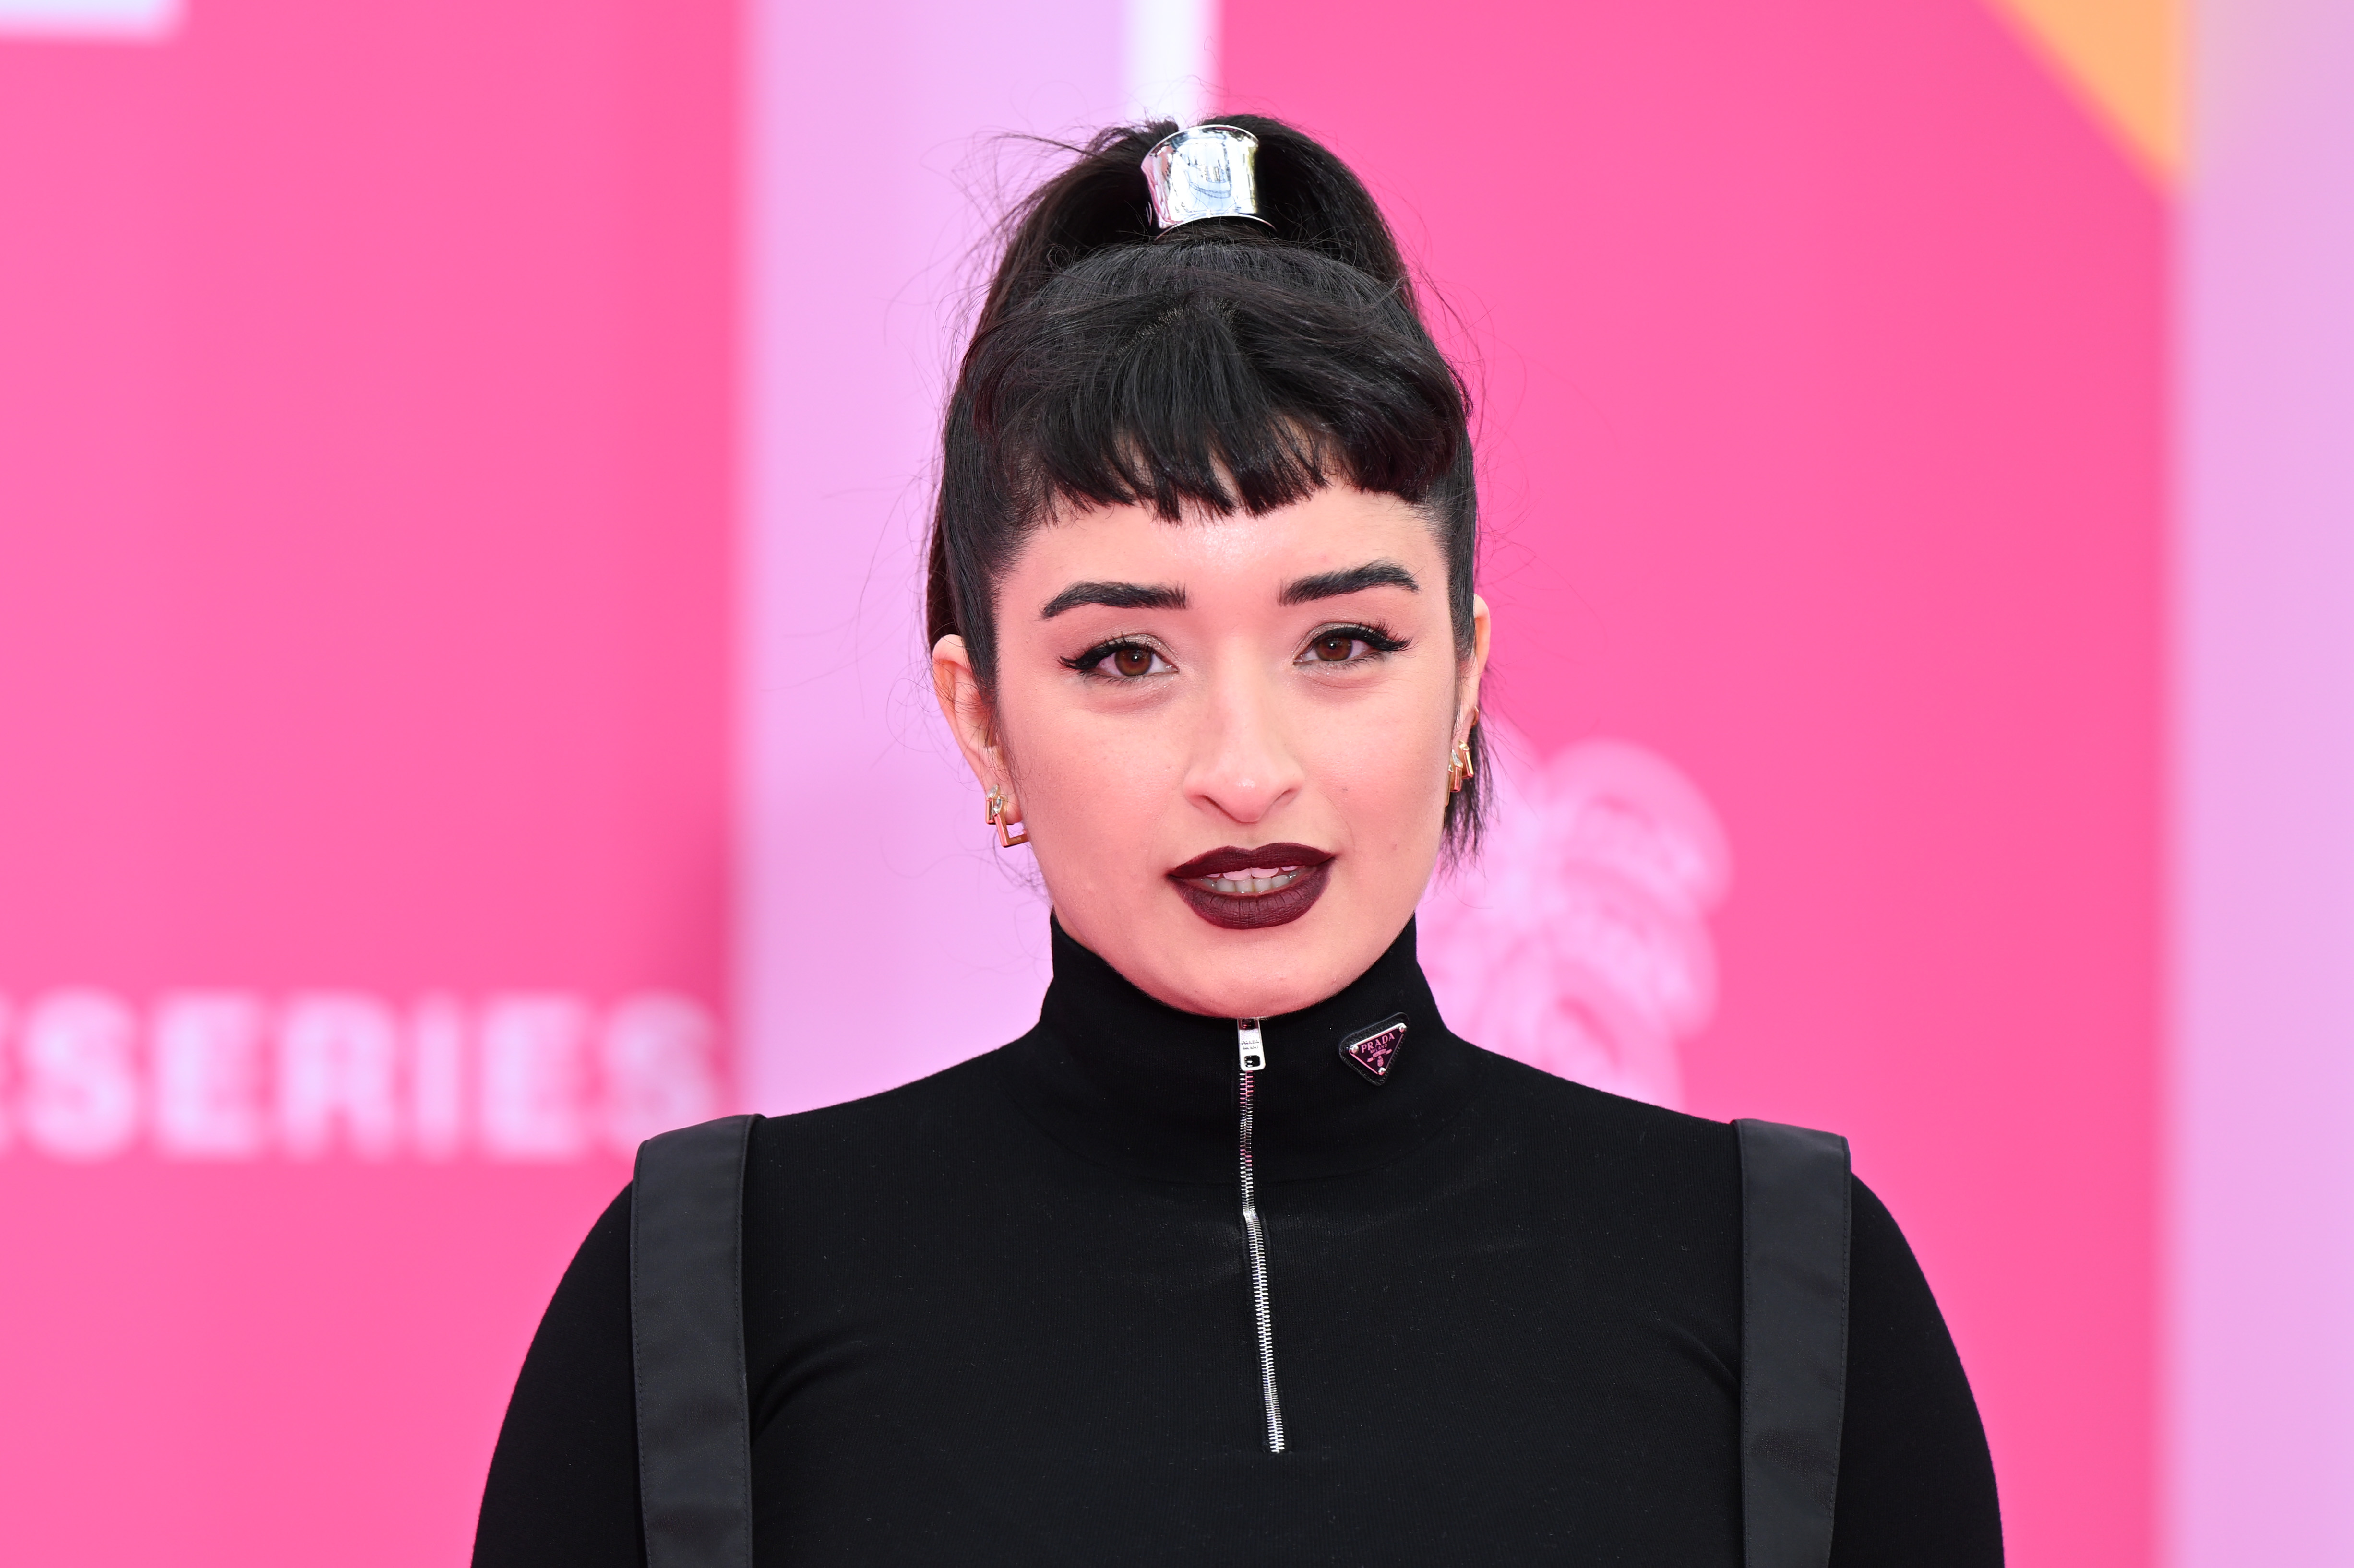 Shirine Boutella attends the opening ceremony during the 6th Canneseries International Festival on April 14, 2023, in Cannes, France. | Source: Getty Images